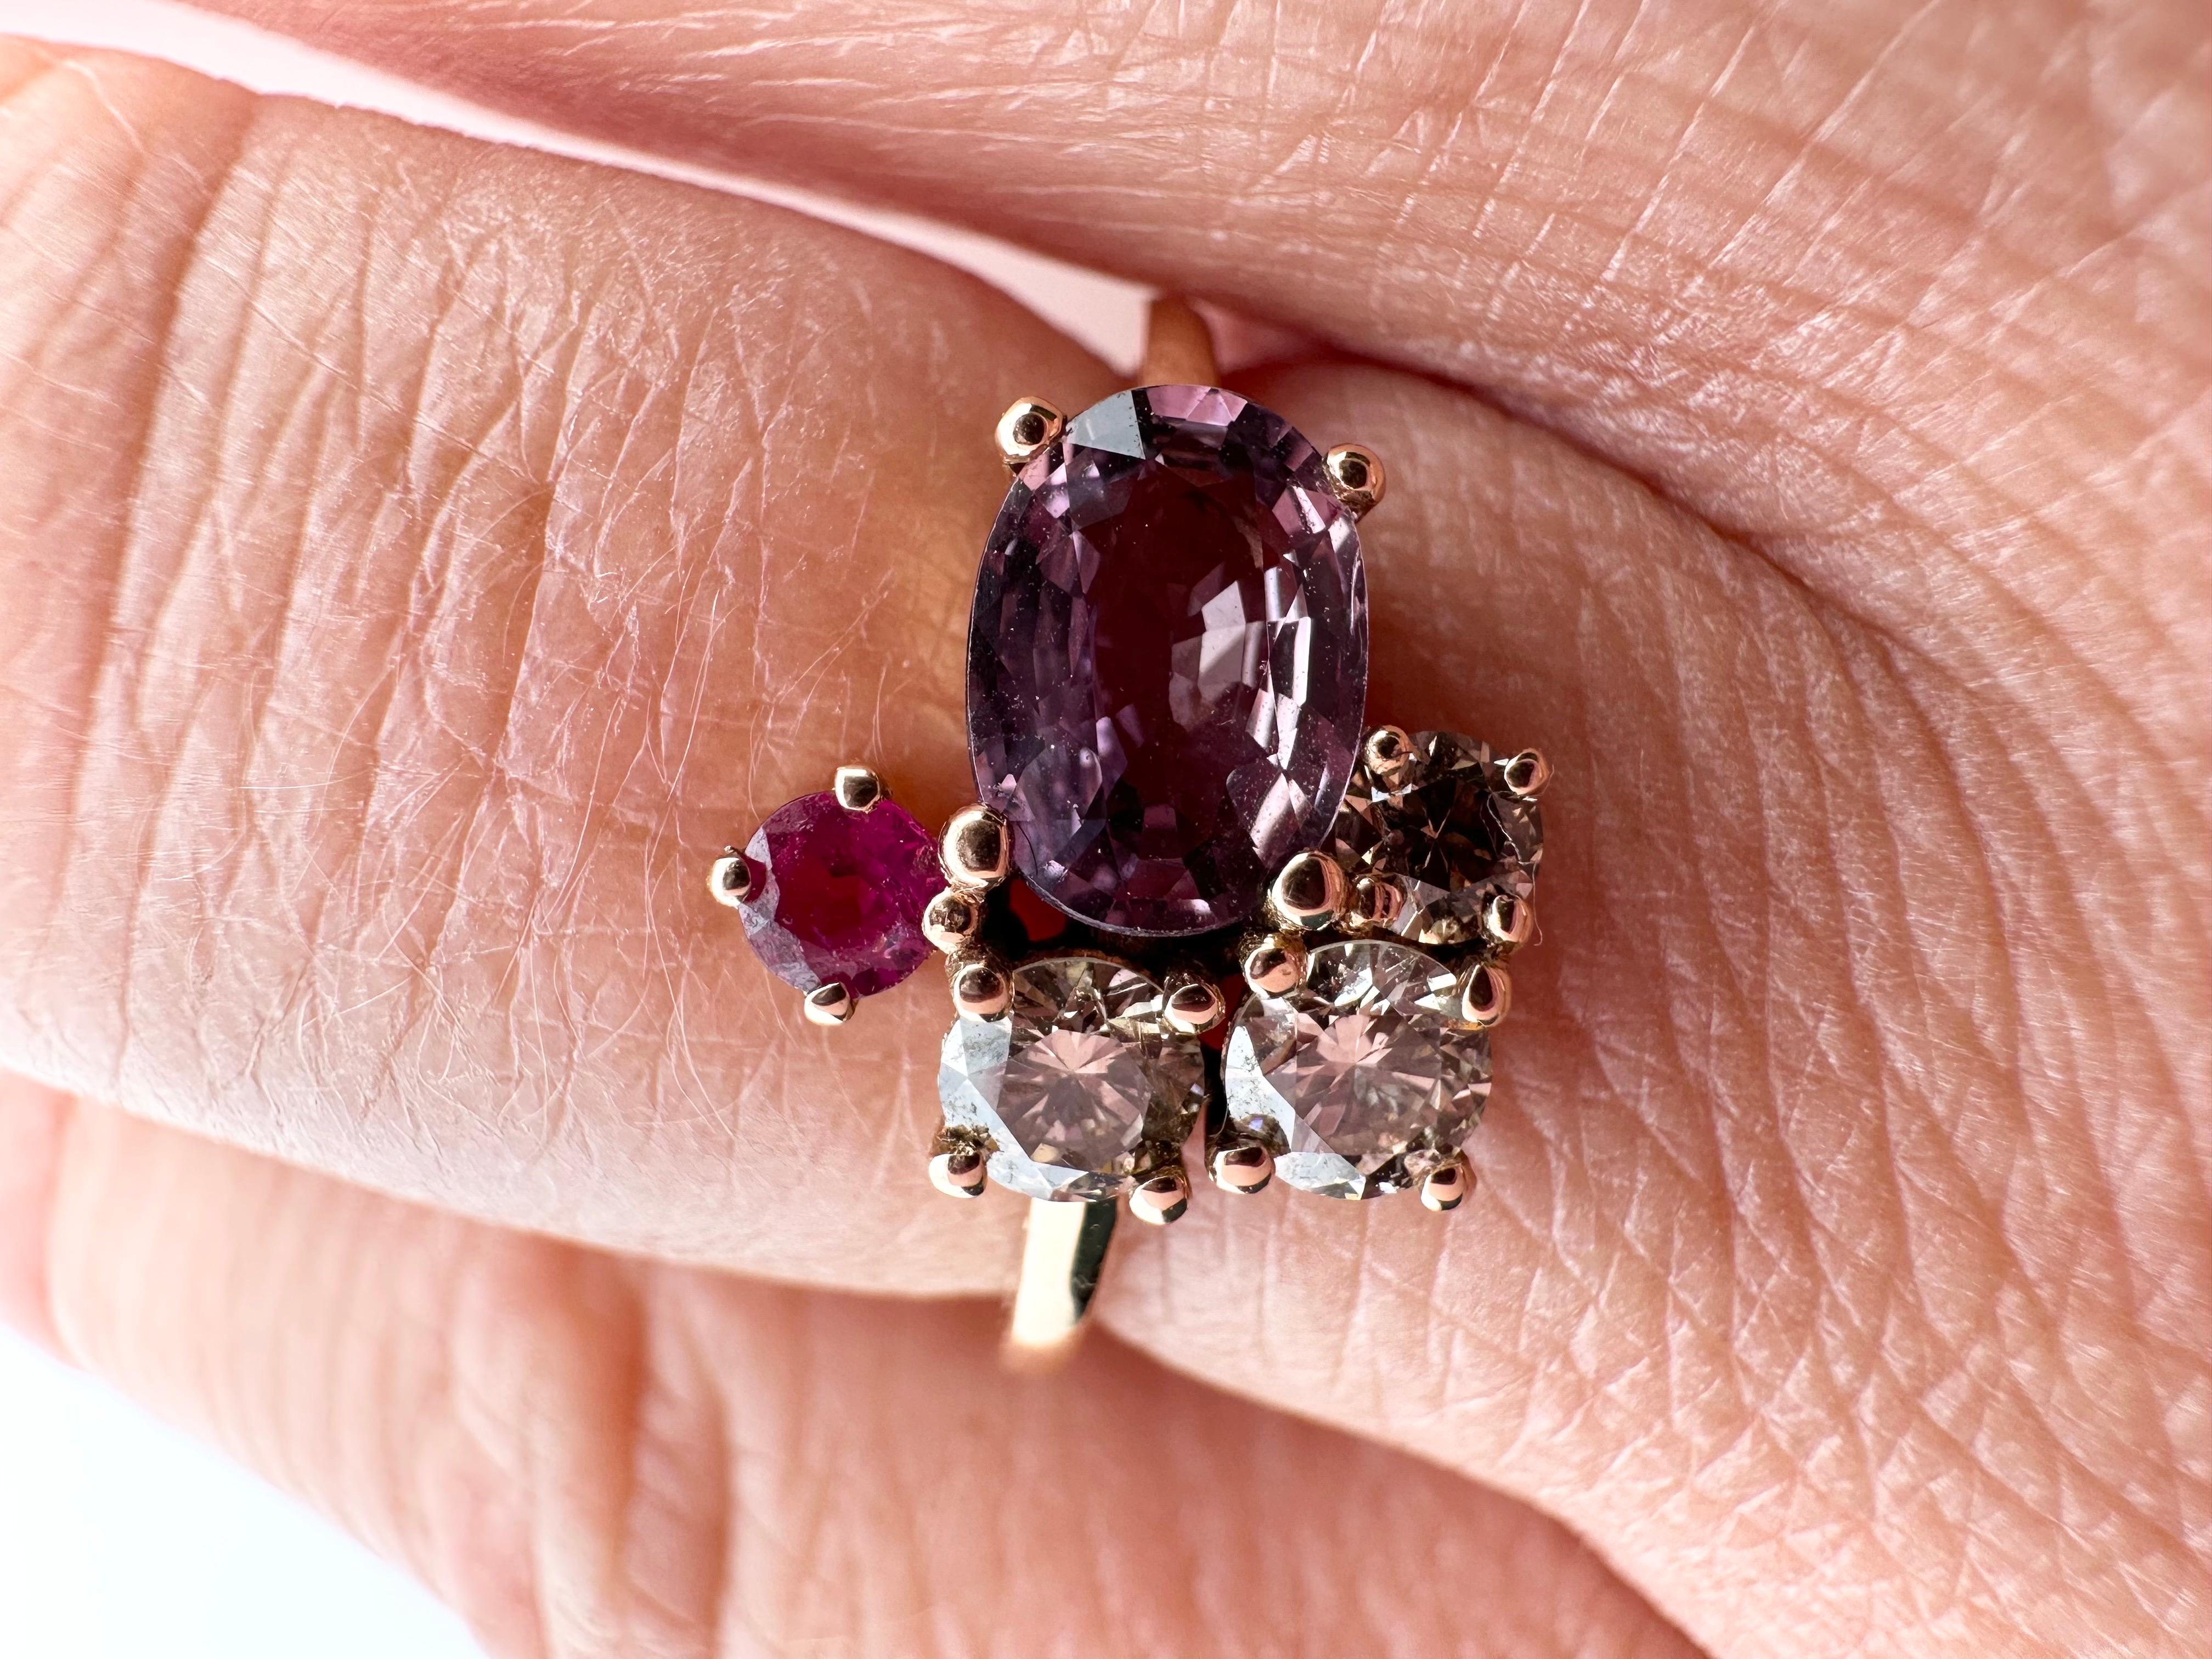 Rare purple sapphire cluster ring with natural champagne diamonds and a ruby, very intersting work of an artist representing so many stones and colors in one ring, very unique and brave presentation. Artist unknown.

Metal Type: 18KT
Gram